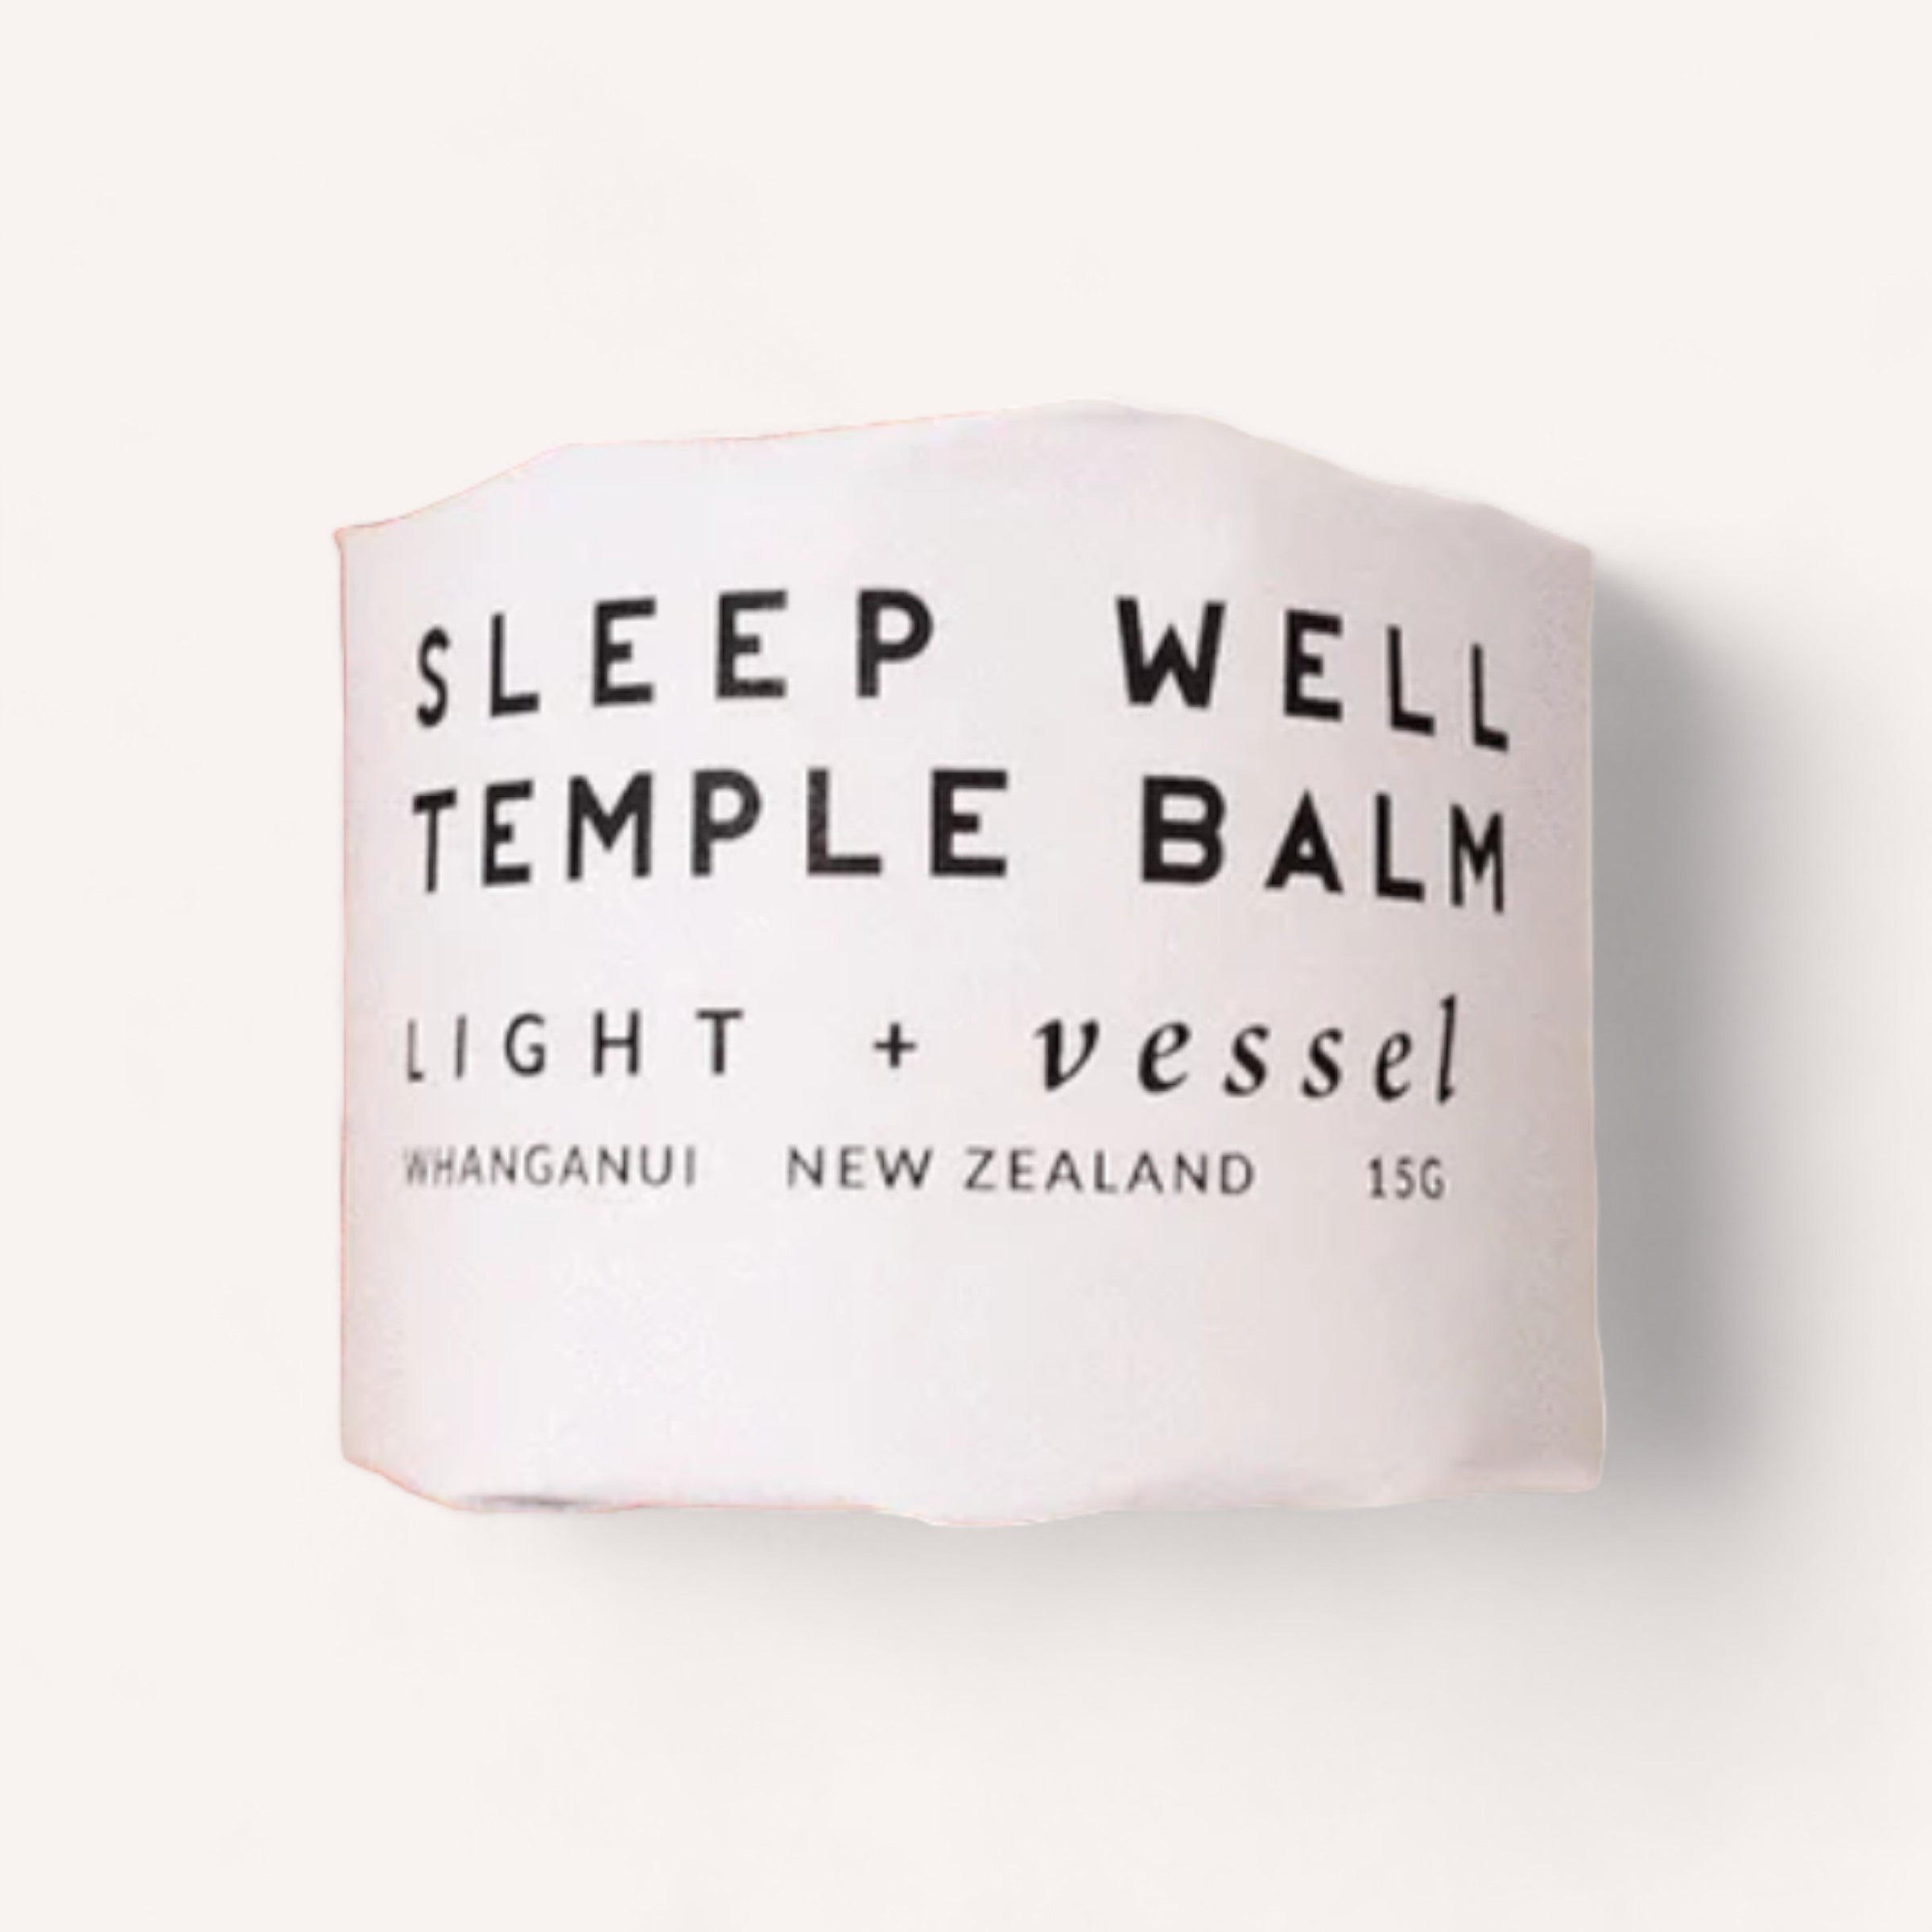 A jar of "Sleep Well Temple Balm" by Light + Vessel, 15 grams, with minimalist labeling, containing lavender essential oil and likely a product made in Whanganui, New Zealand.